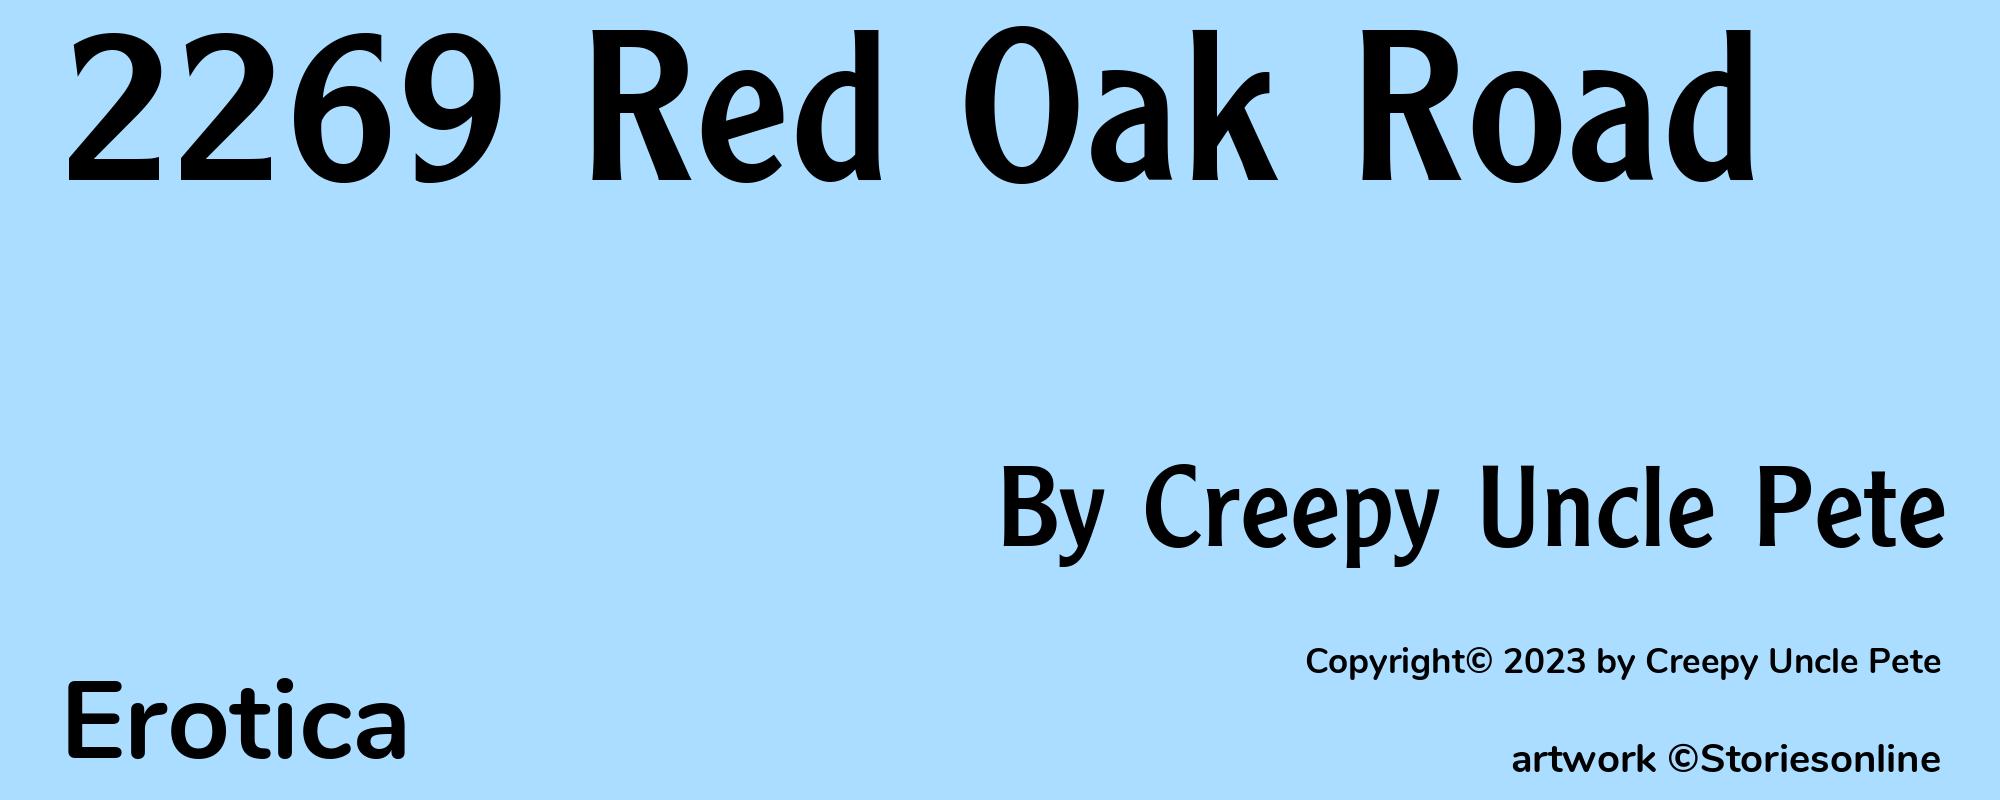 2269 Red Oak Road - Cover